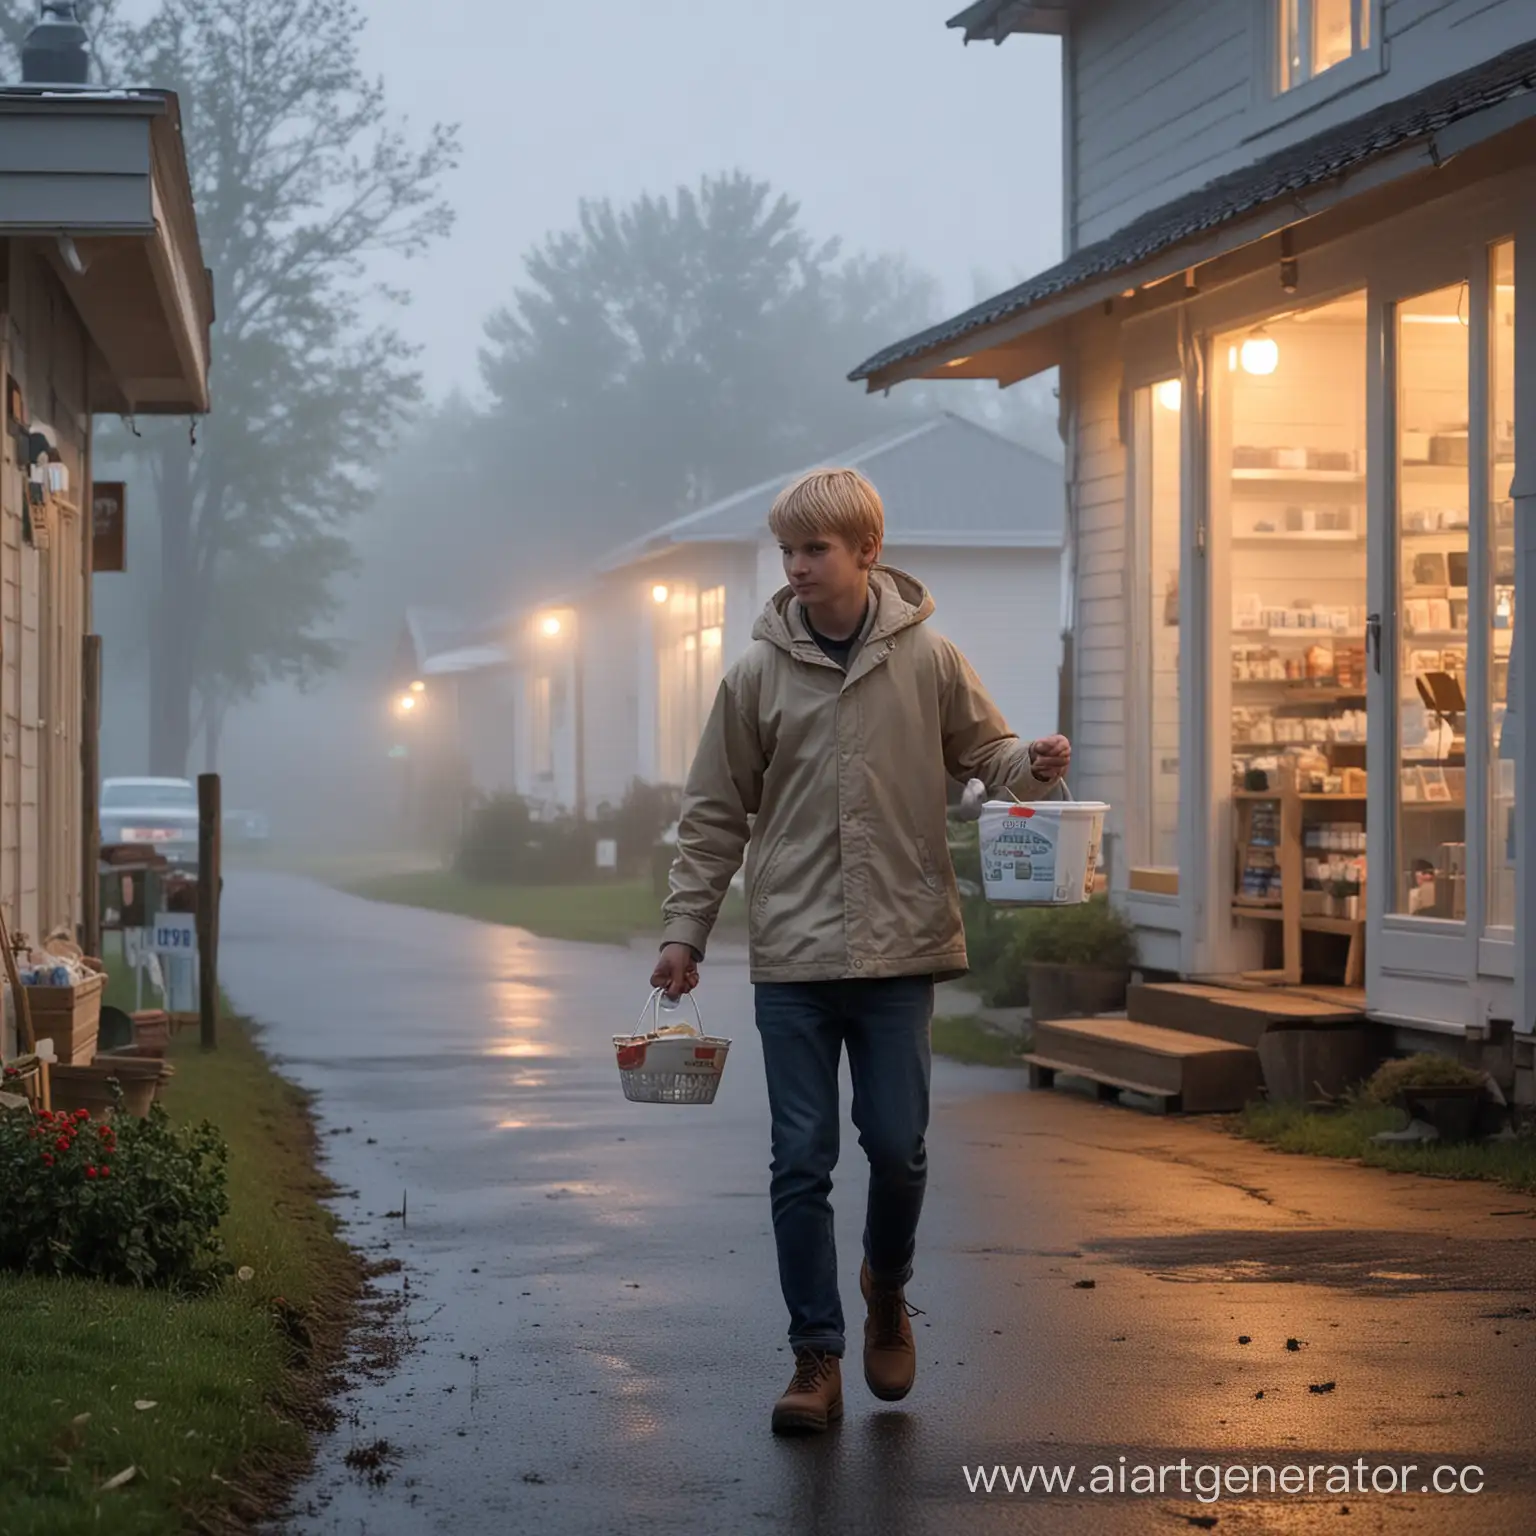 Countryside-Store-Visit-Young-Blond-Man-with-Blind-Son-Buying-Yogurt-at-Dusk